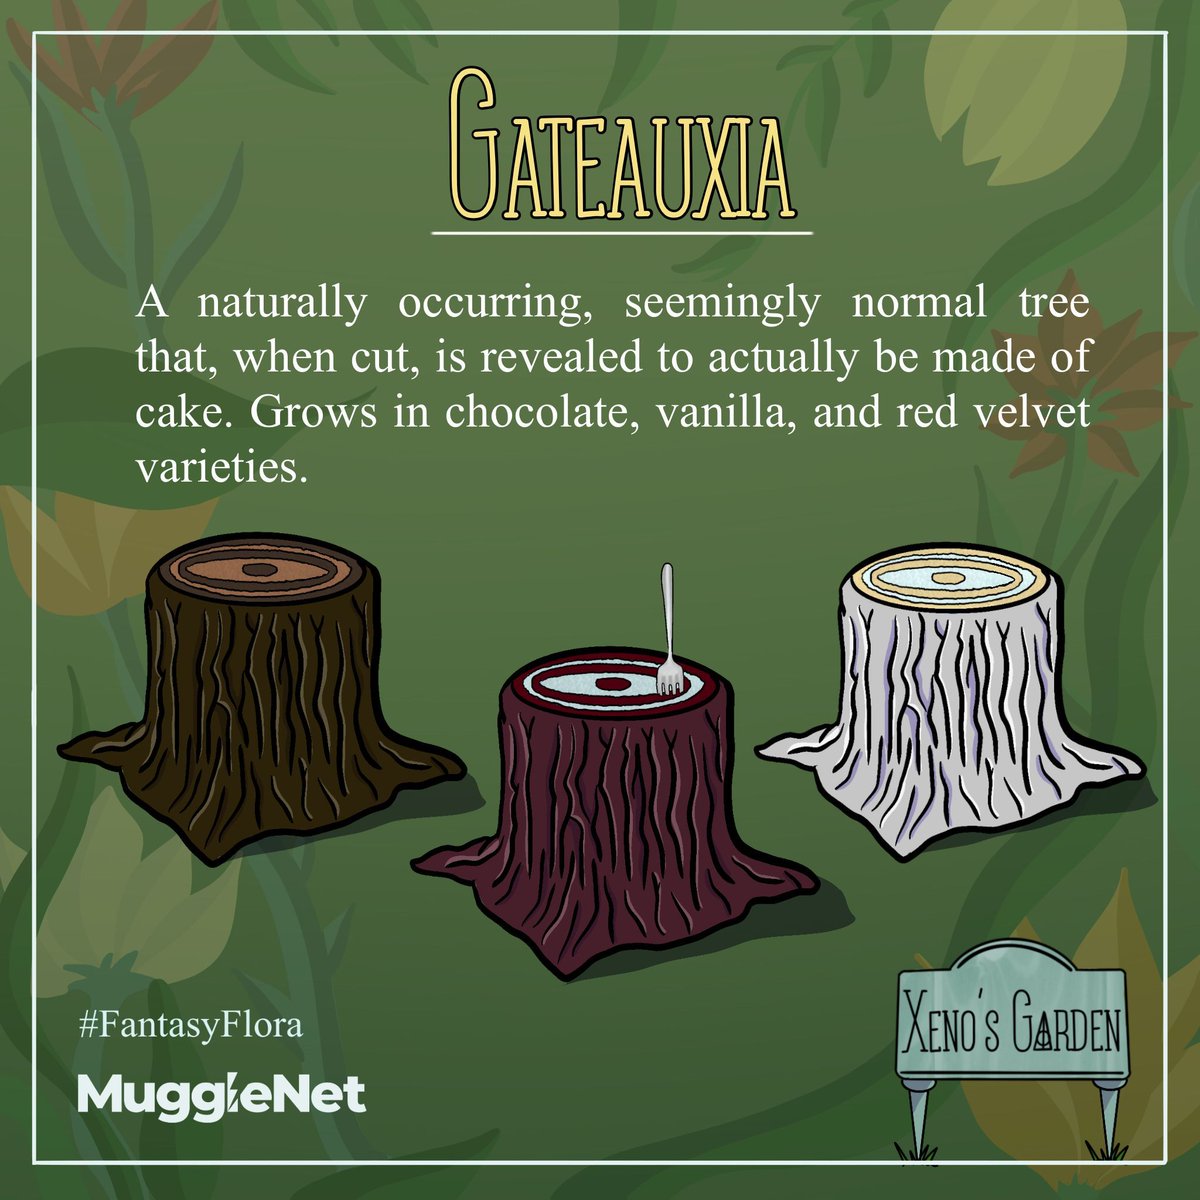 In today's 'Xeno's Garden,' we feature the 'Gateauxia.' A tree that is both delicious and highly edible, the 'Gateauxia' is a favorite among those who have an insatiable sweet tooth. 🍫 😋 #Gateauxia #FantasyFlora